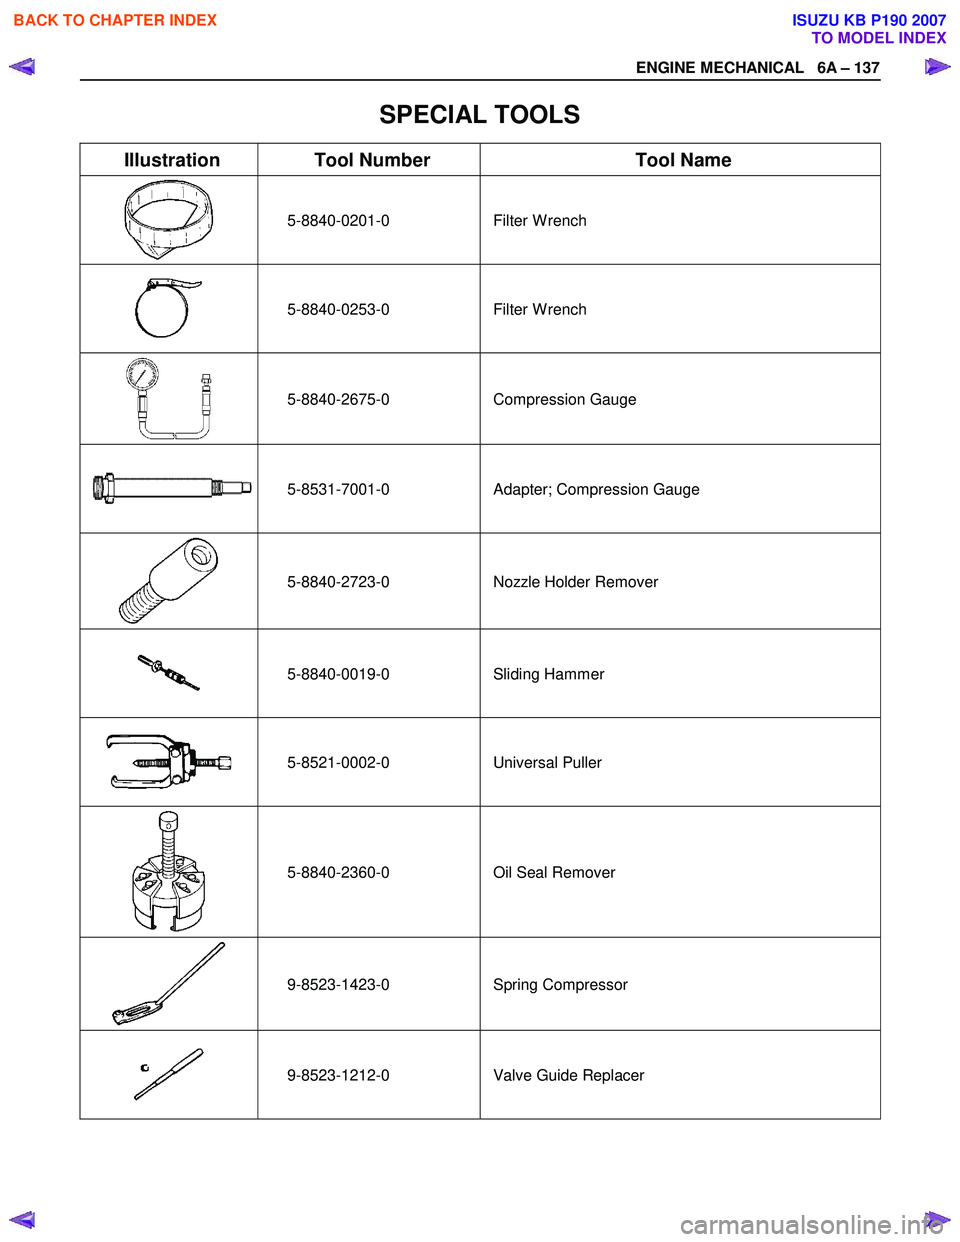 ISUZU KB P190 2007  Workshop Repair Manual ENGINE MECHANICAL   6A – 137 
SPECIAL TOOLS 
Illustration  Tool Number Tool Name 
 5-8840-0201-0 Filter 
W rench 
 5-8840-0253-0 Filter 
W rench 
 5-8840-2675-0 Compression Gauge 
 
5-8531-7001-0 
A